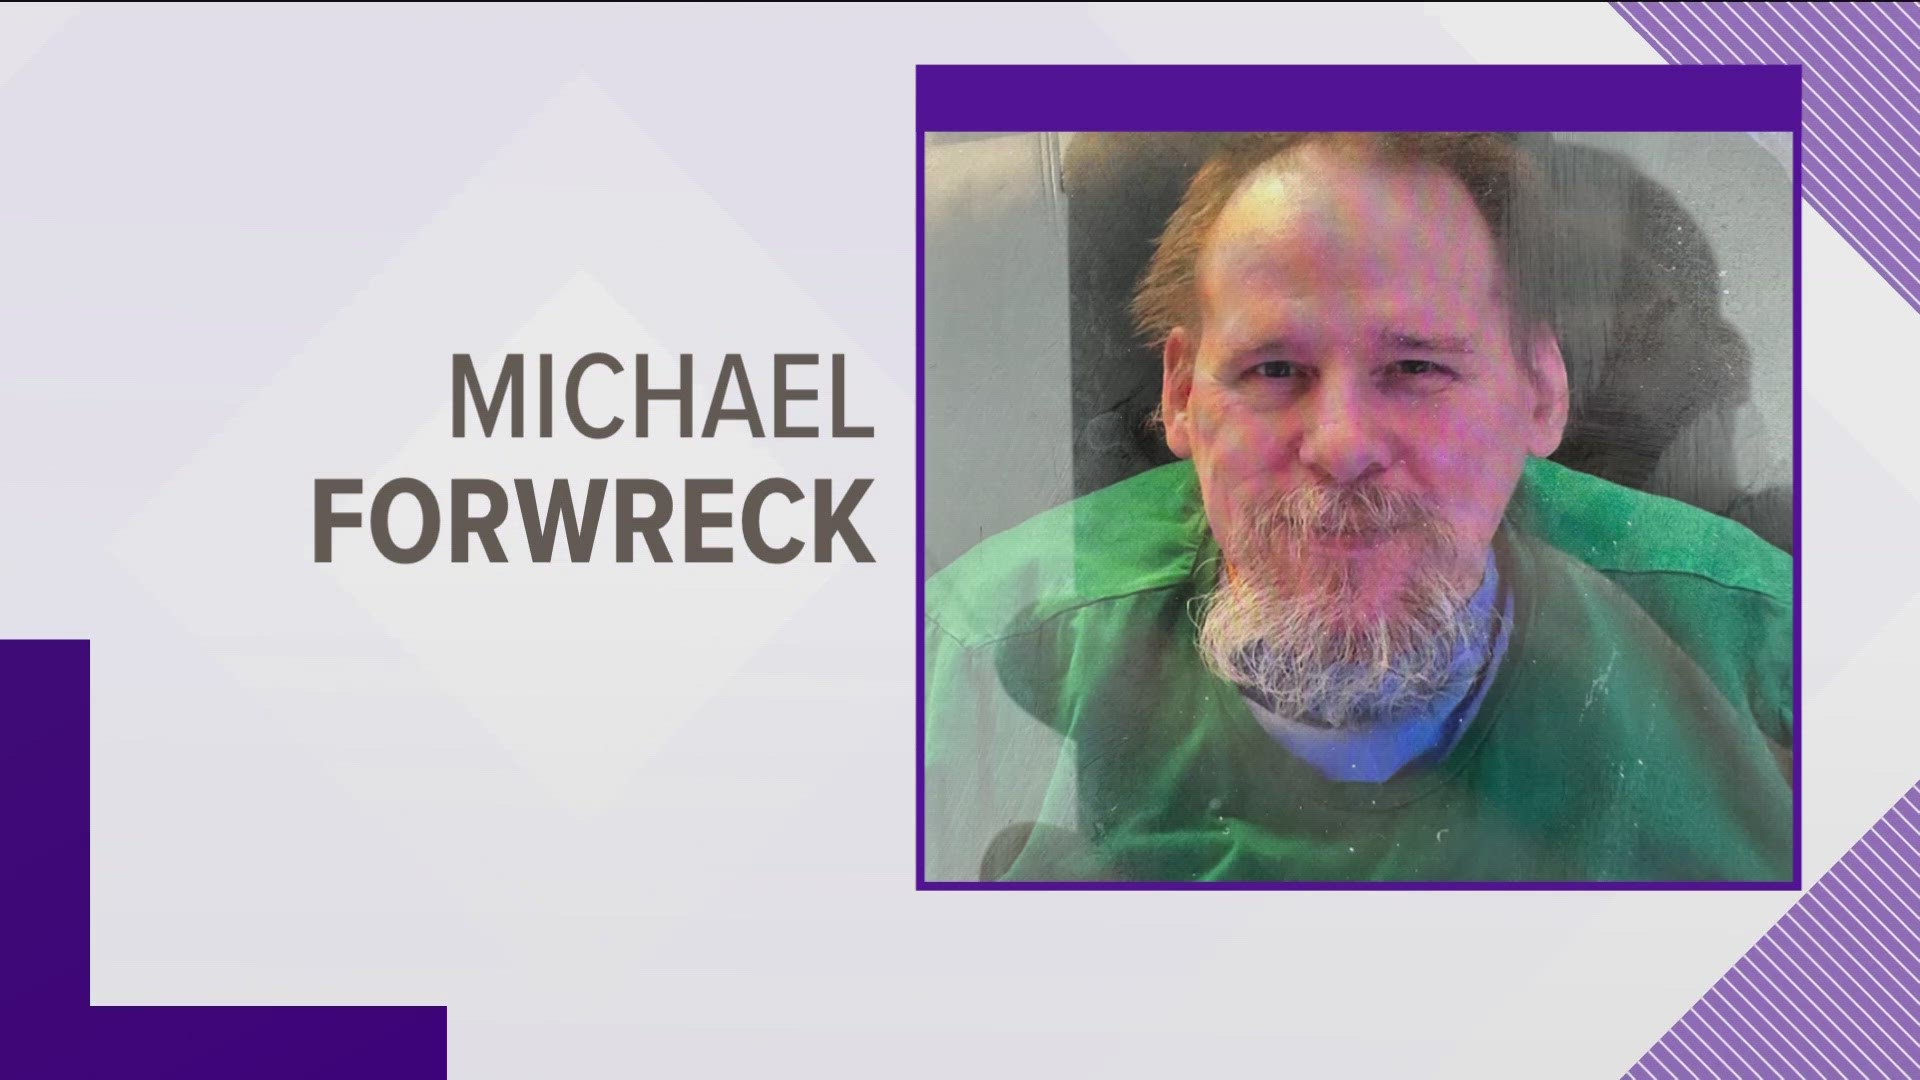 Michael Forwreck, 62, was last seen in the 1000 block of Tecumseh Street. He is believed to be wearing a full sweat suit, tan tank top and red shoes, TPD said.